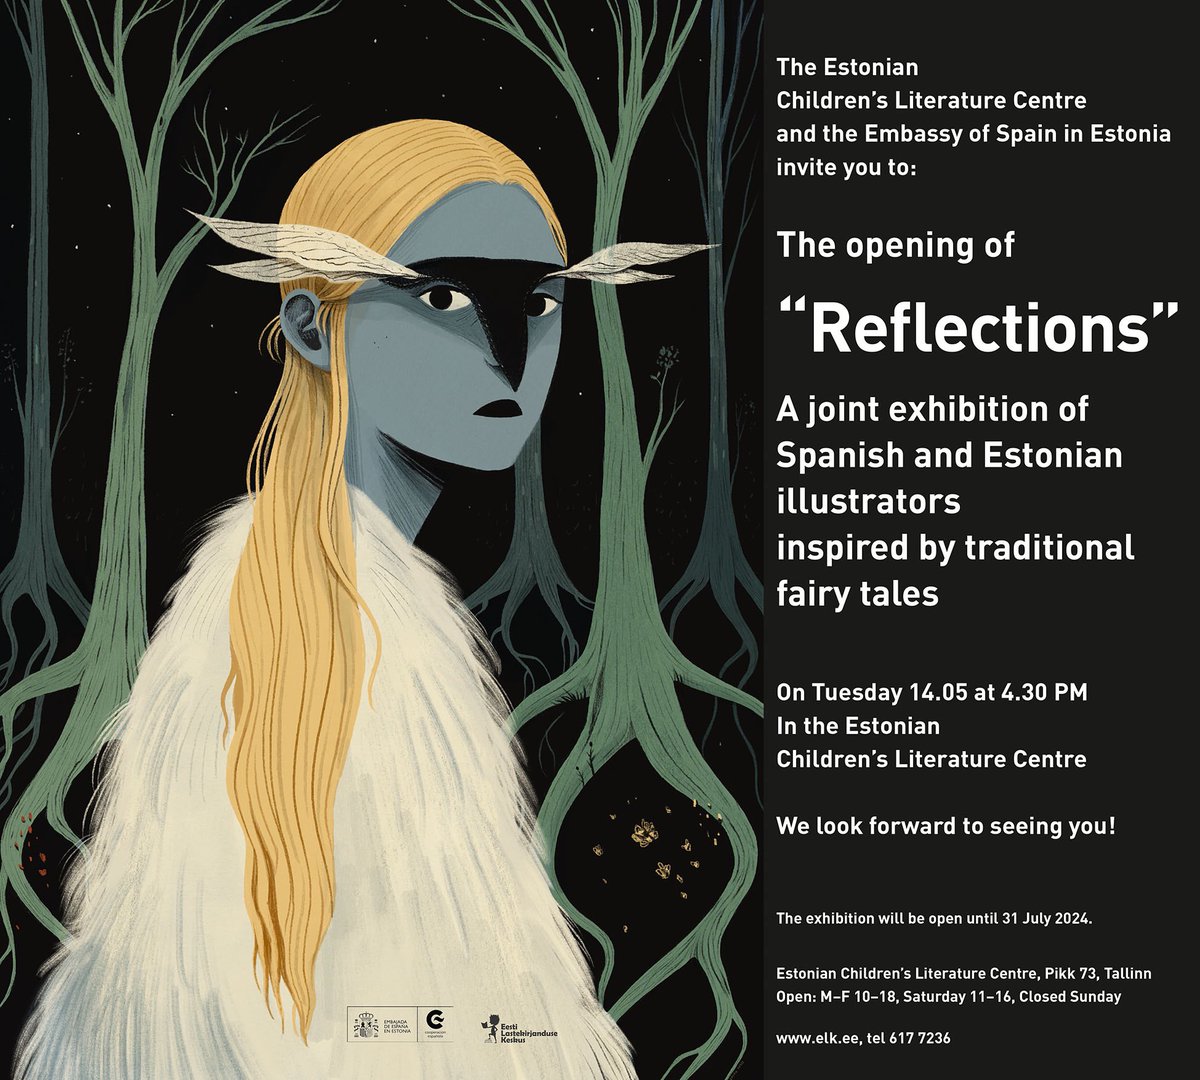 Illustrations for “Reflections” a join exhibition of Spanish and Estonian illustrators inspired by traditional fairy tales, opened on Tuesday 14 at the Estonian Children’s Literature Centre in Tallinn. Thanks to @en_estonia @EmbEspEstonia